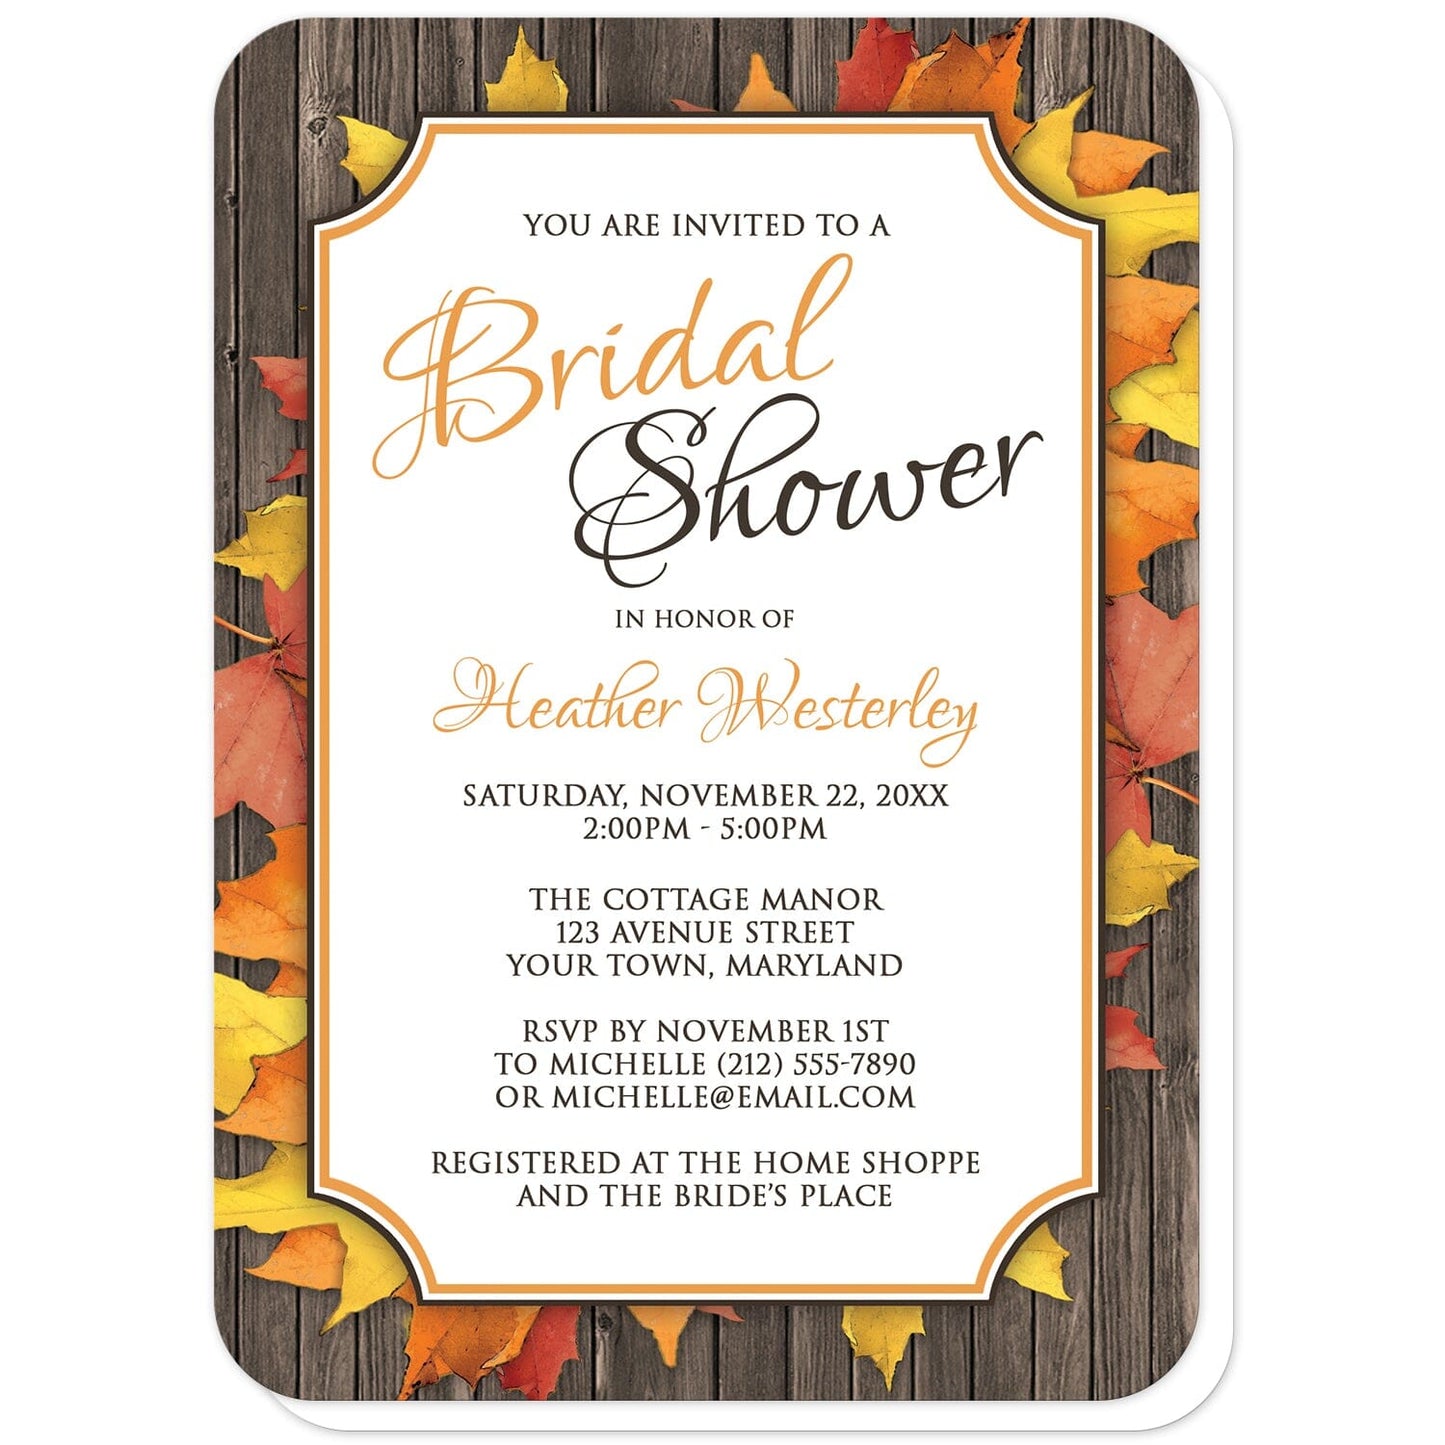 Autumn Orange White Wood Bridal Shower Invitations (with rounded corners) at Artistically Invited. Autumn orange white wood bridal shower invitations with your celebration details printed in orange and brown in a white frame, over fall leaves spread out over a wood pattern background. This design combines rustic country elements with modern frame lines and fonts.